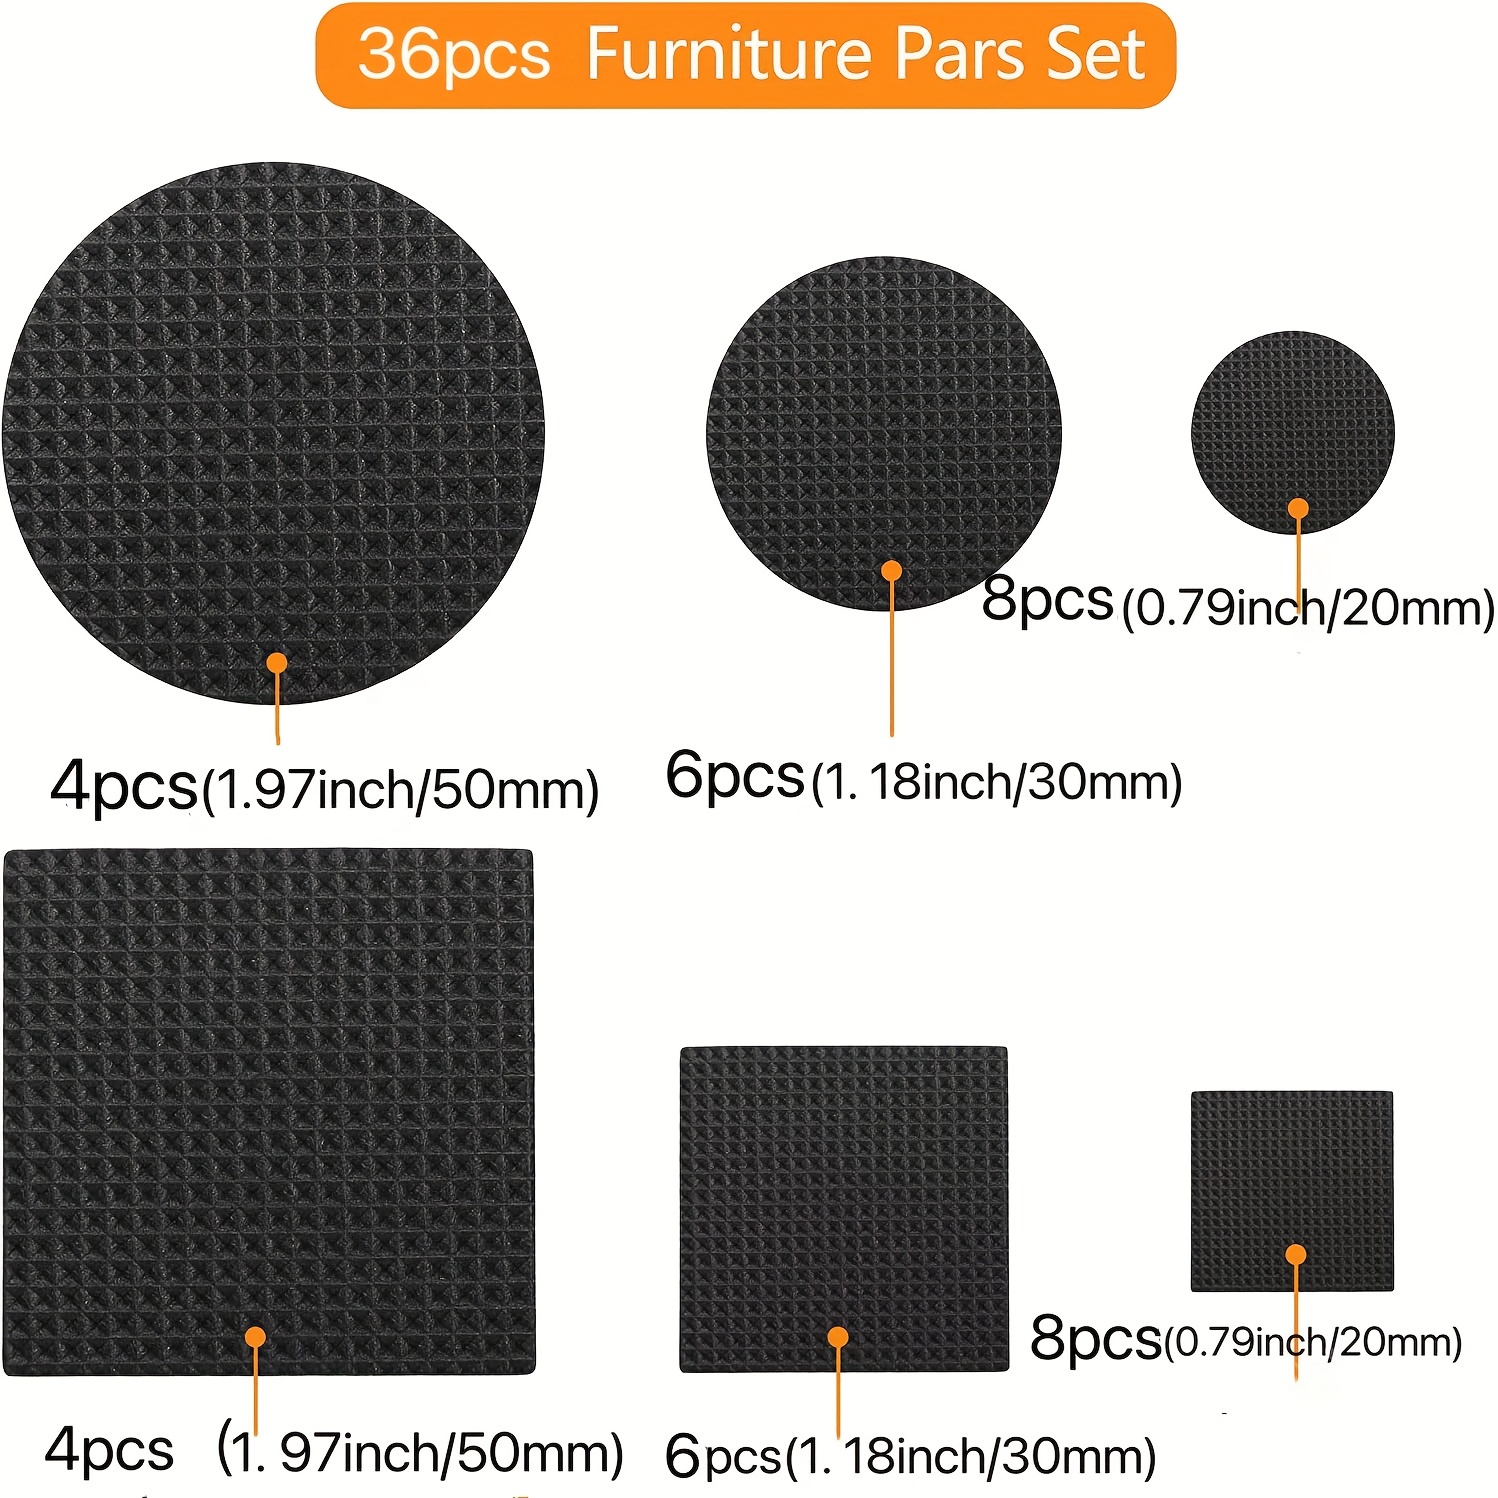 Non Slip Furniture Pads -18 pcs 3 Furniture Grippers, Non Skid for  Furniture Legs,Self Adhesive Rubber Feet Furniture Feet, Anti Slide  Furniture